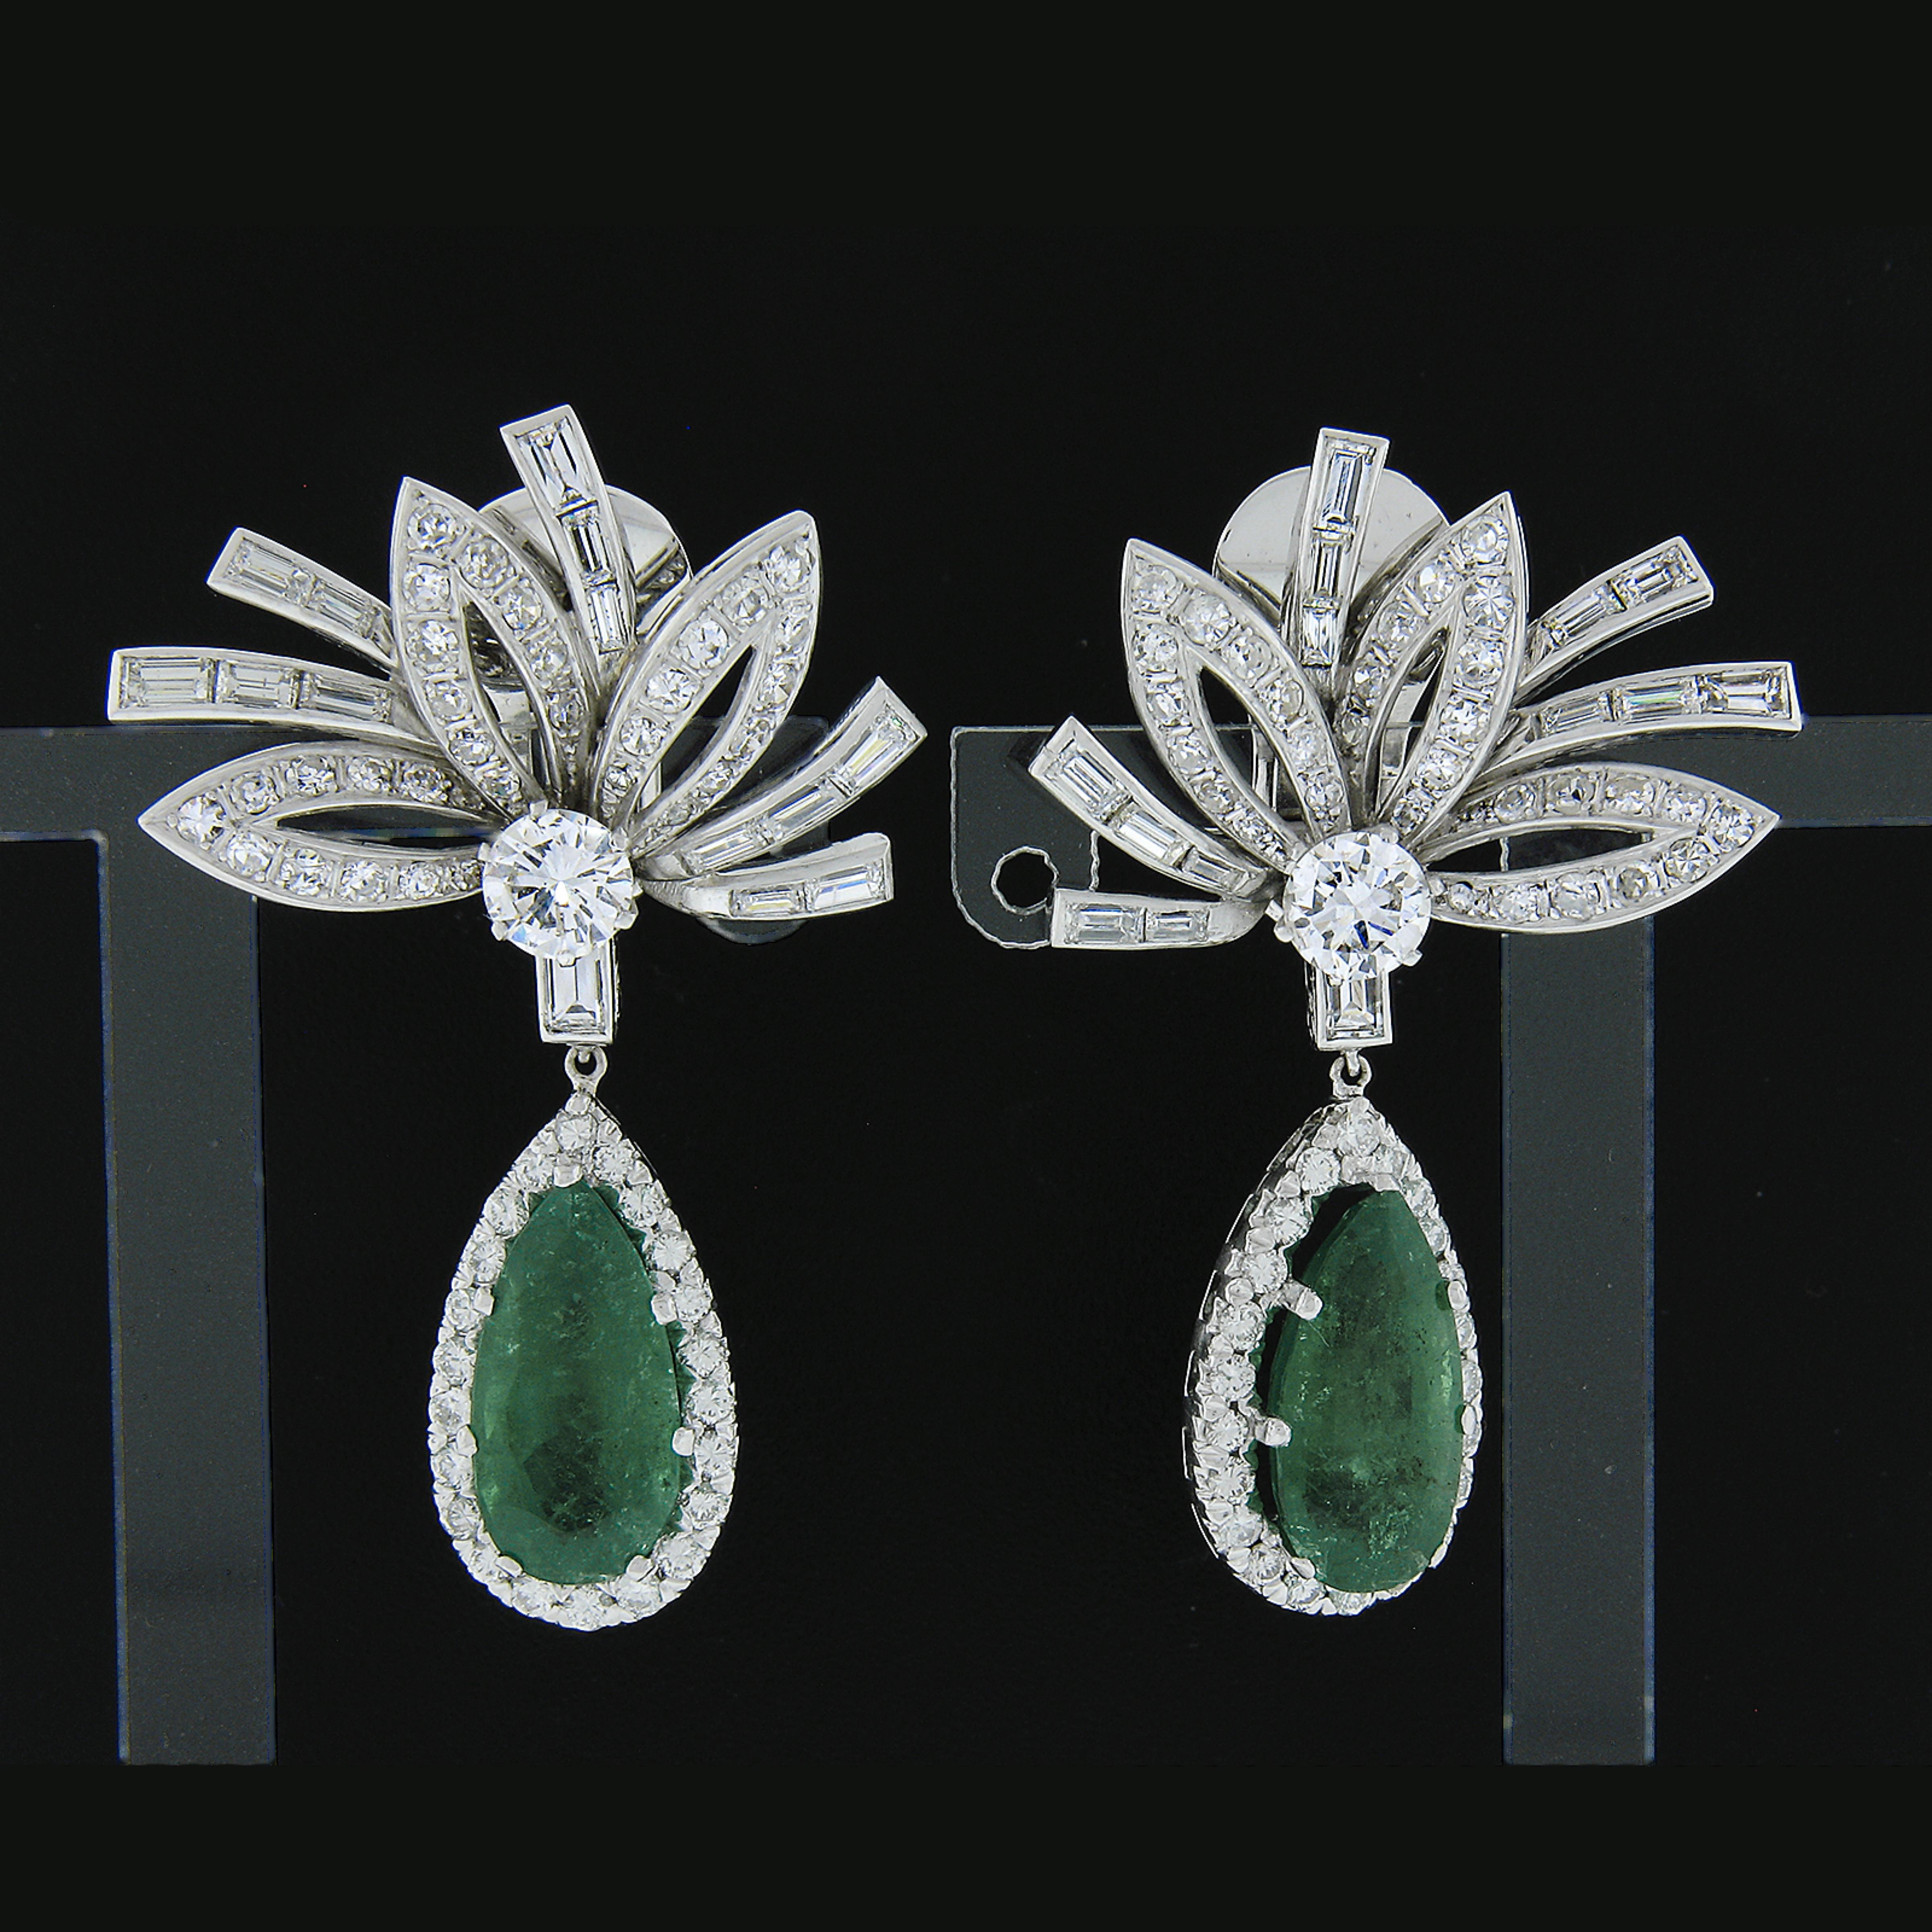 You are looking at a truly breathtaking pair of earrings that are crafted in solid platinum and feature two very well matched, GIA certified, pear brilliant cut emerald in which together total approximately 8.38 carats in weight. These fine stones